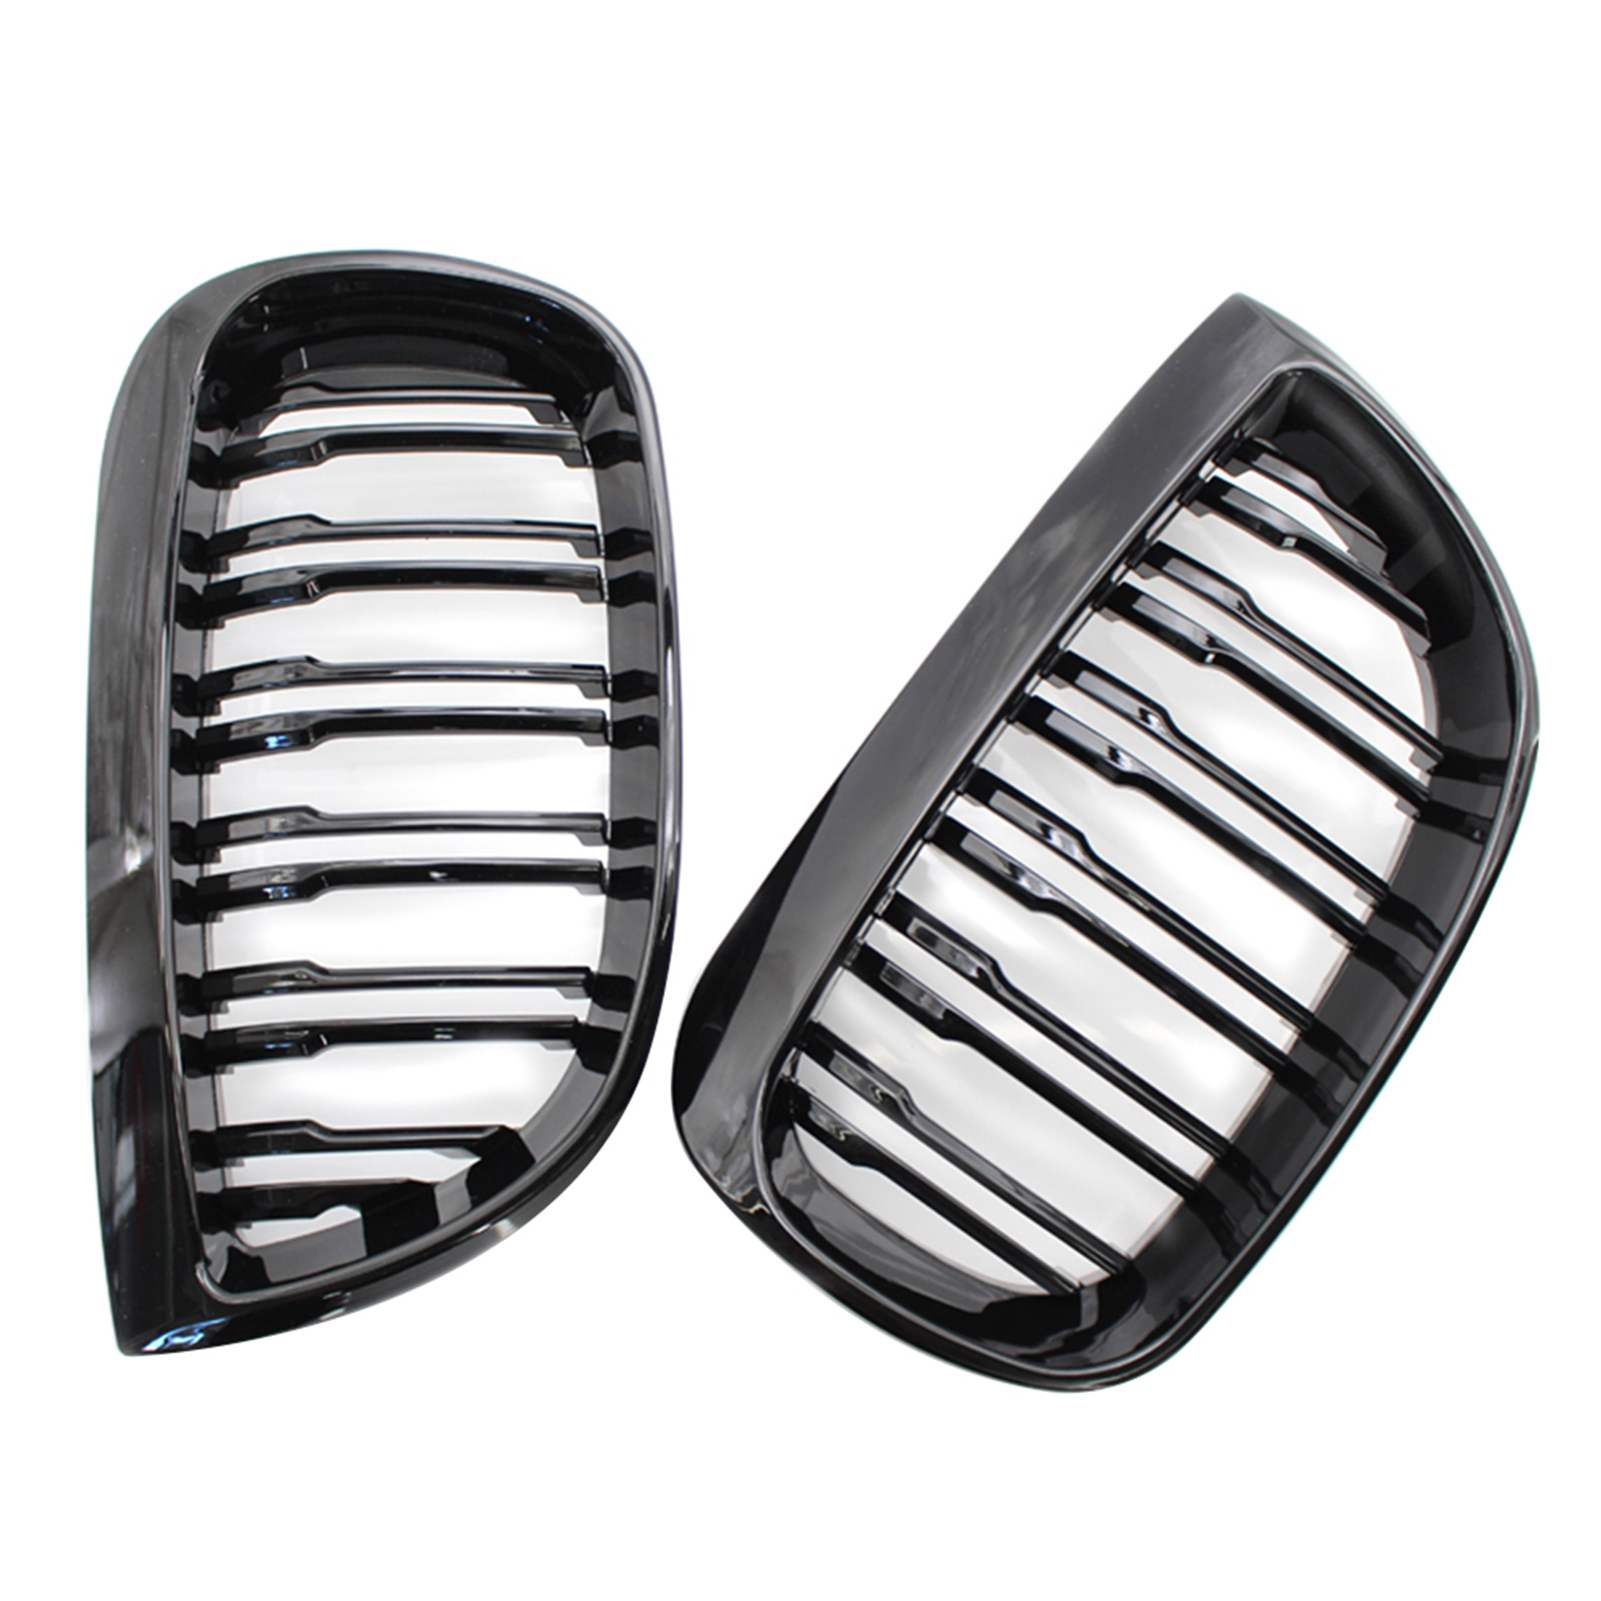 Andoer Pair Front Grille Grills Replacement for 1 Series E81 E87 2004-2007 Car Styling Racing Grills - image 2 of 7